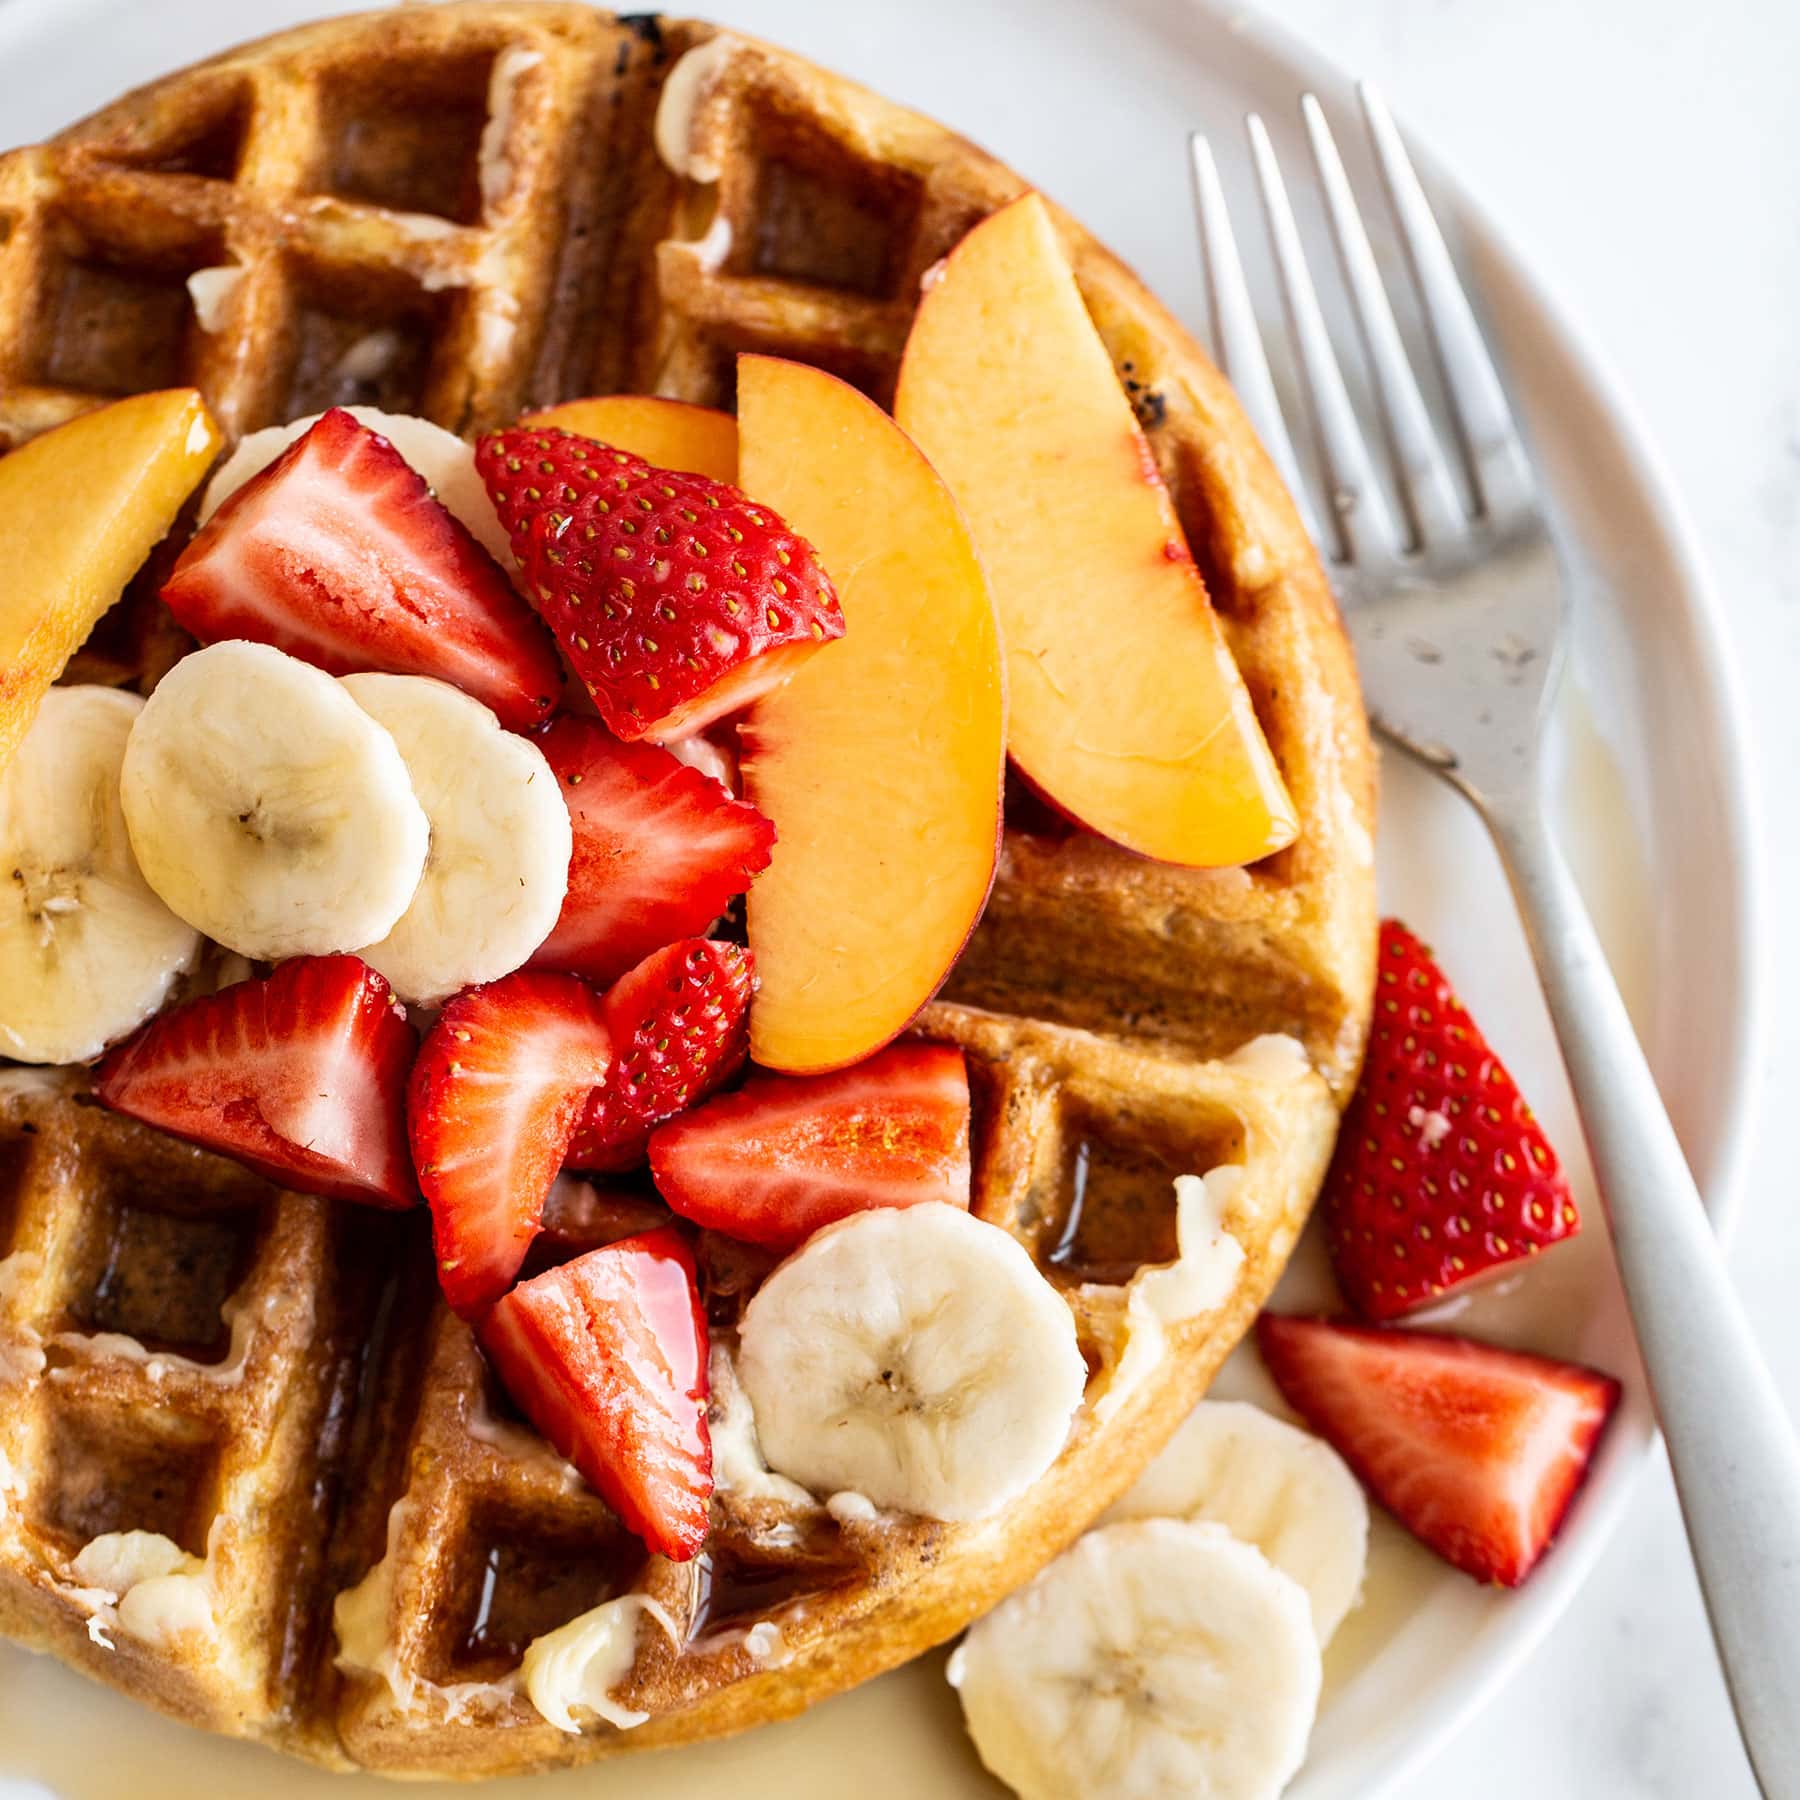 Homemade Belgian waffle on a plate with syrup and fresh fruit